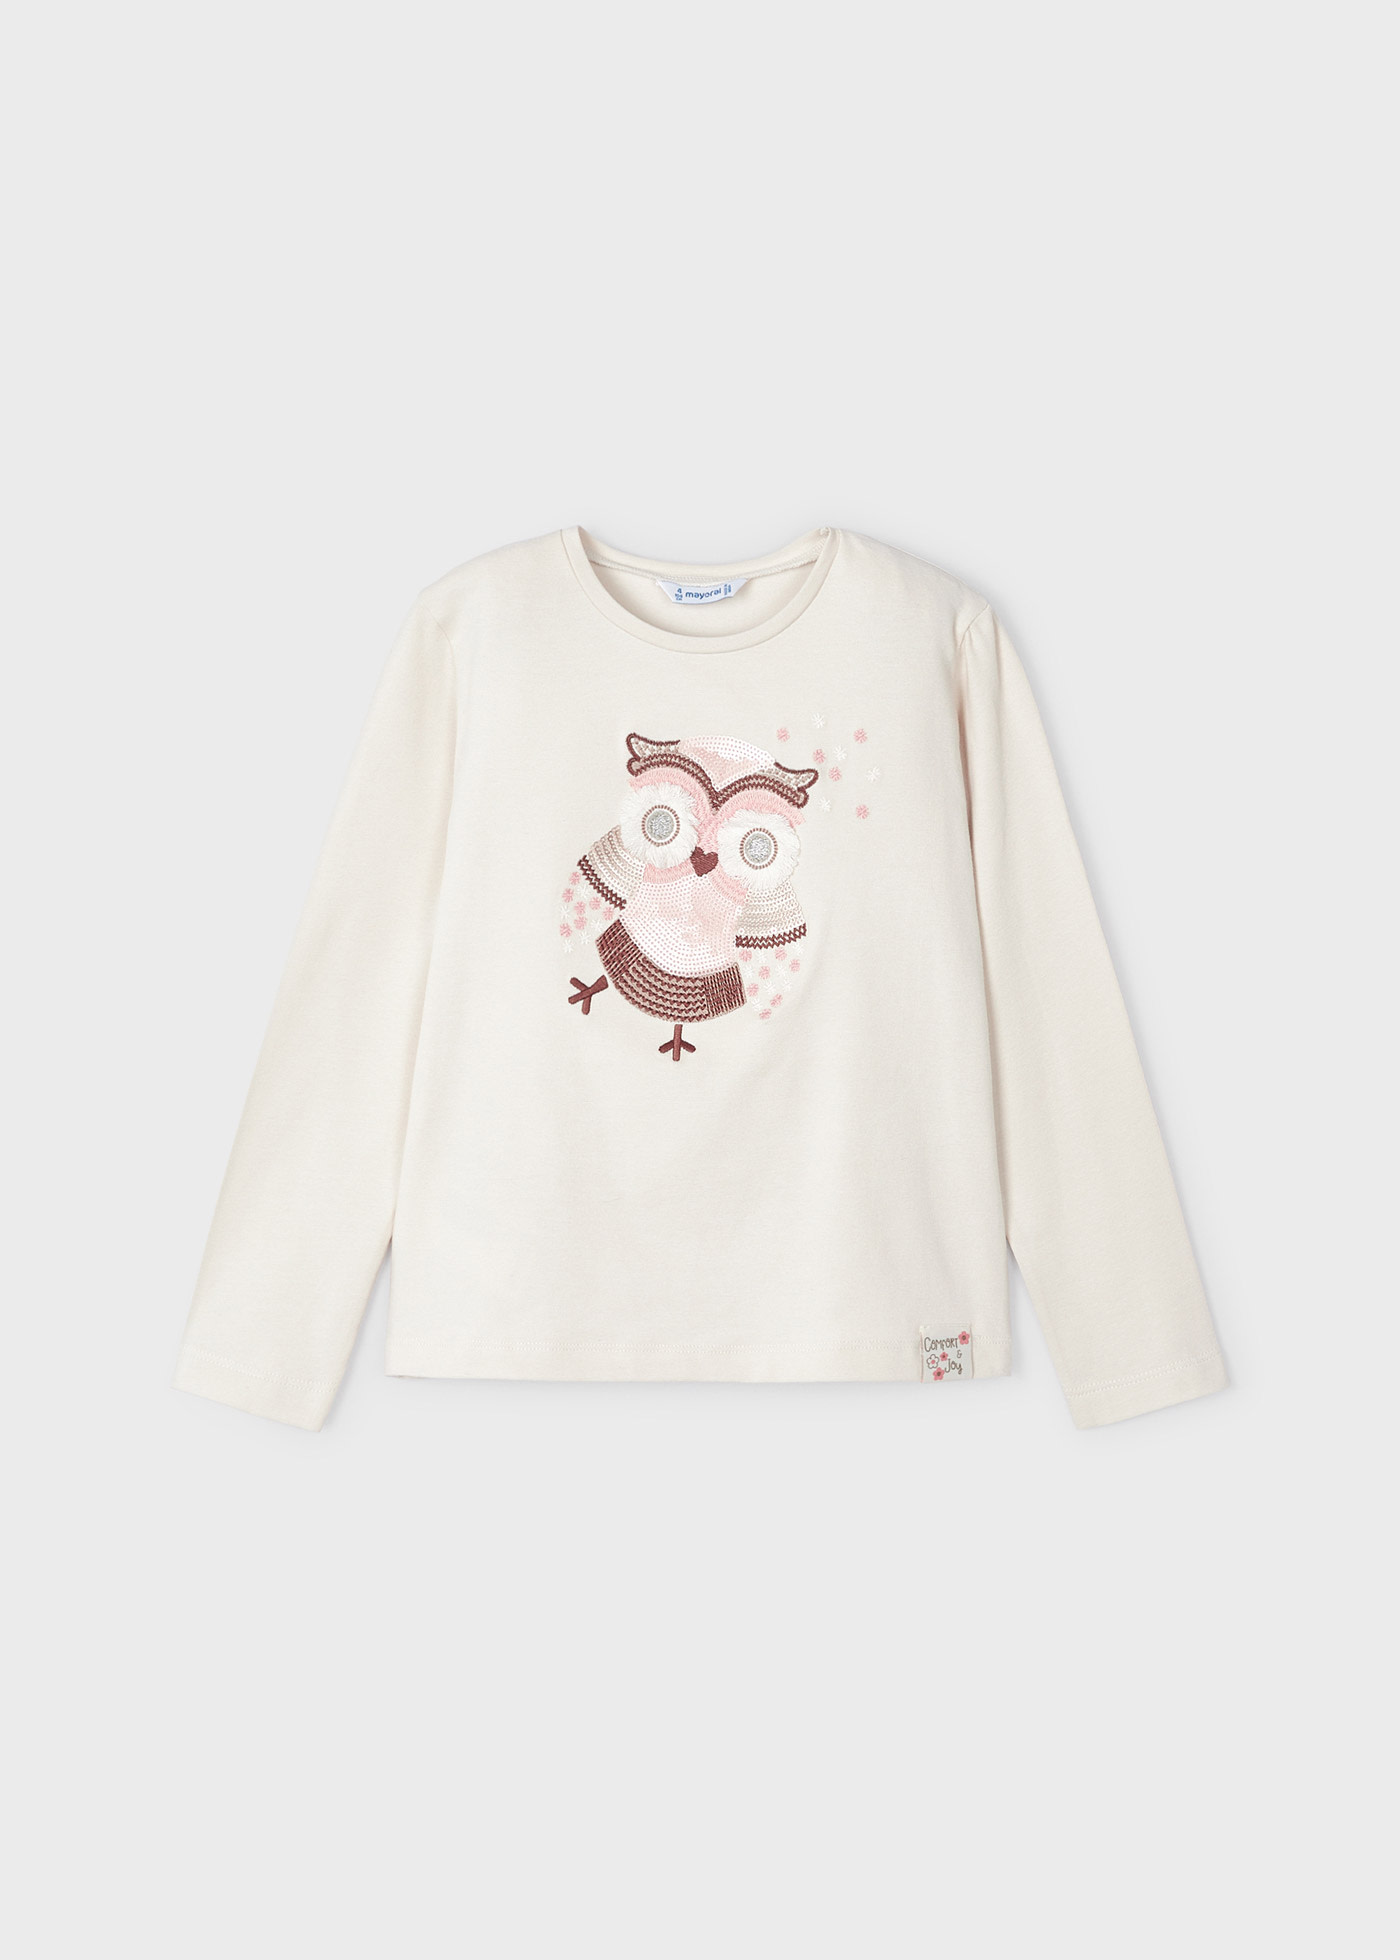 Embroidered long sleeve t-shirt girl